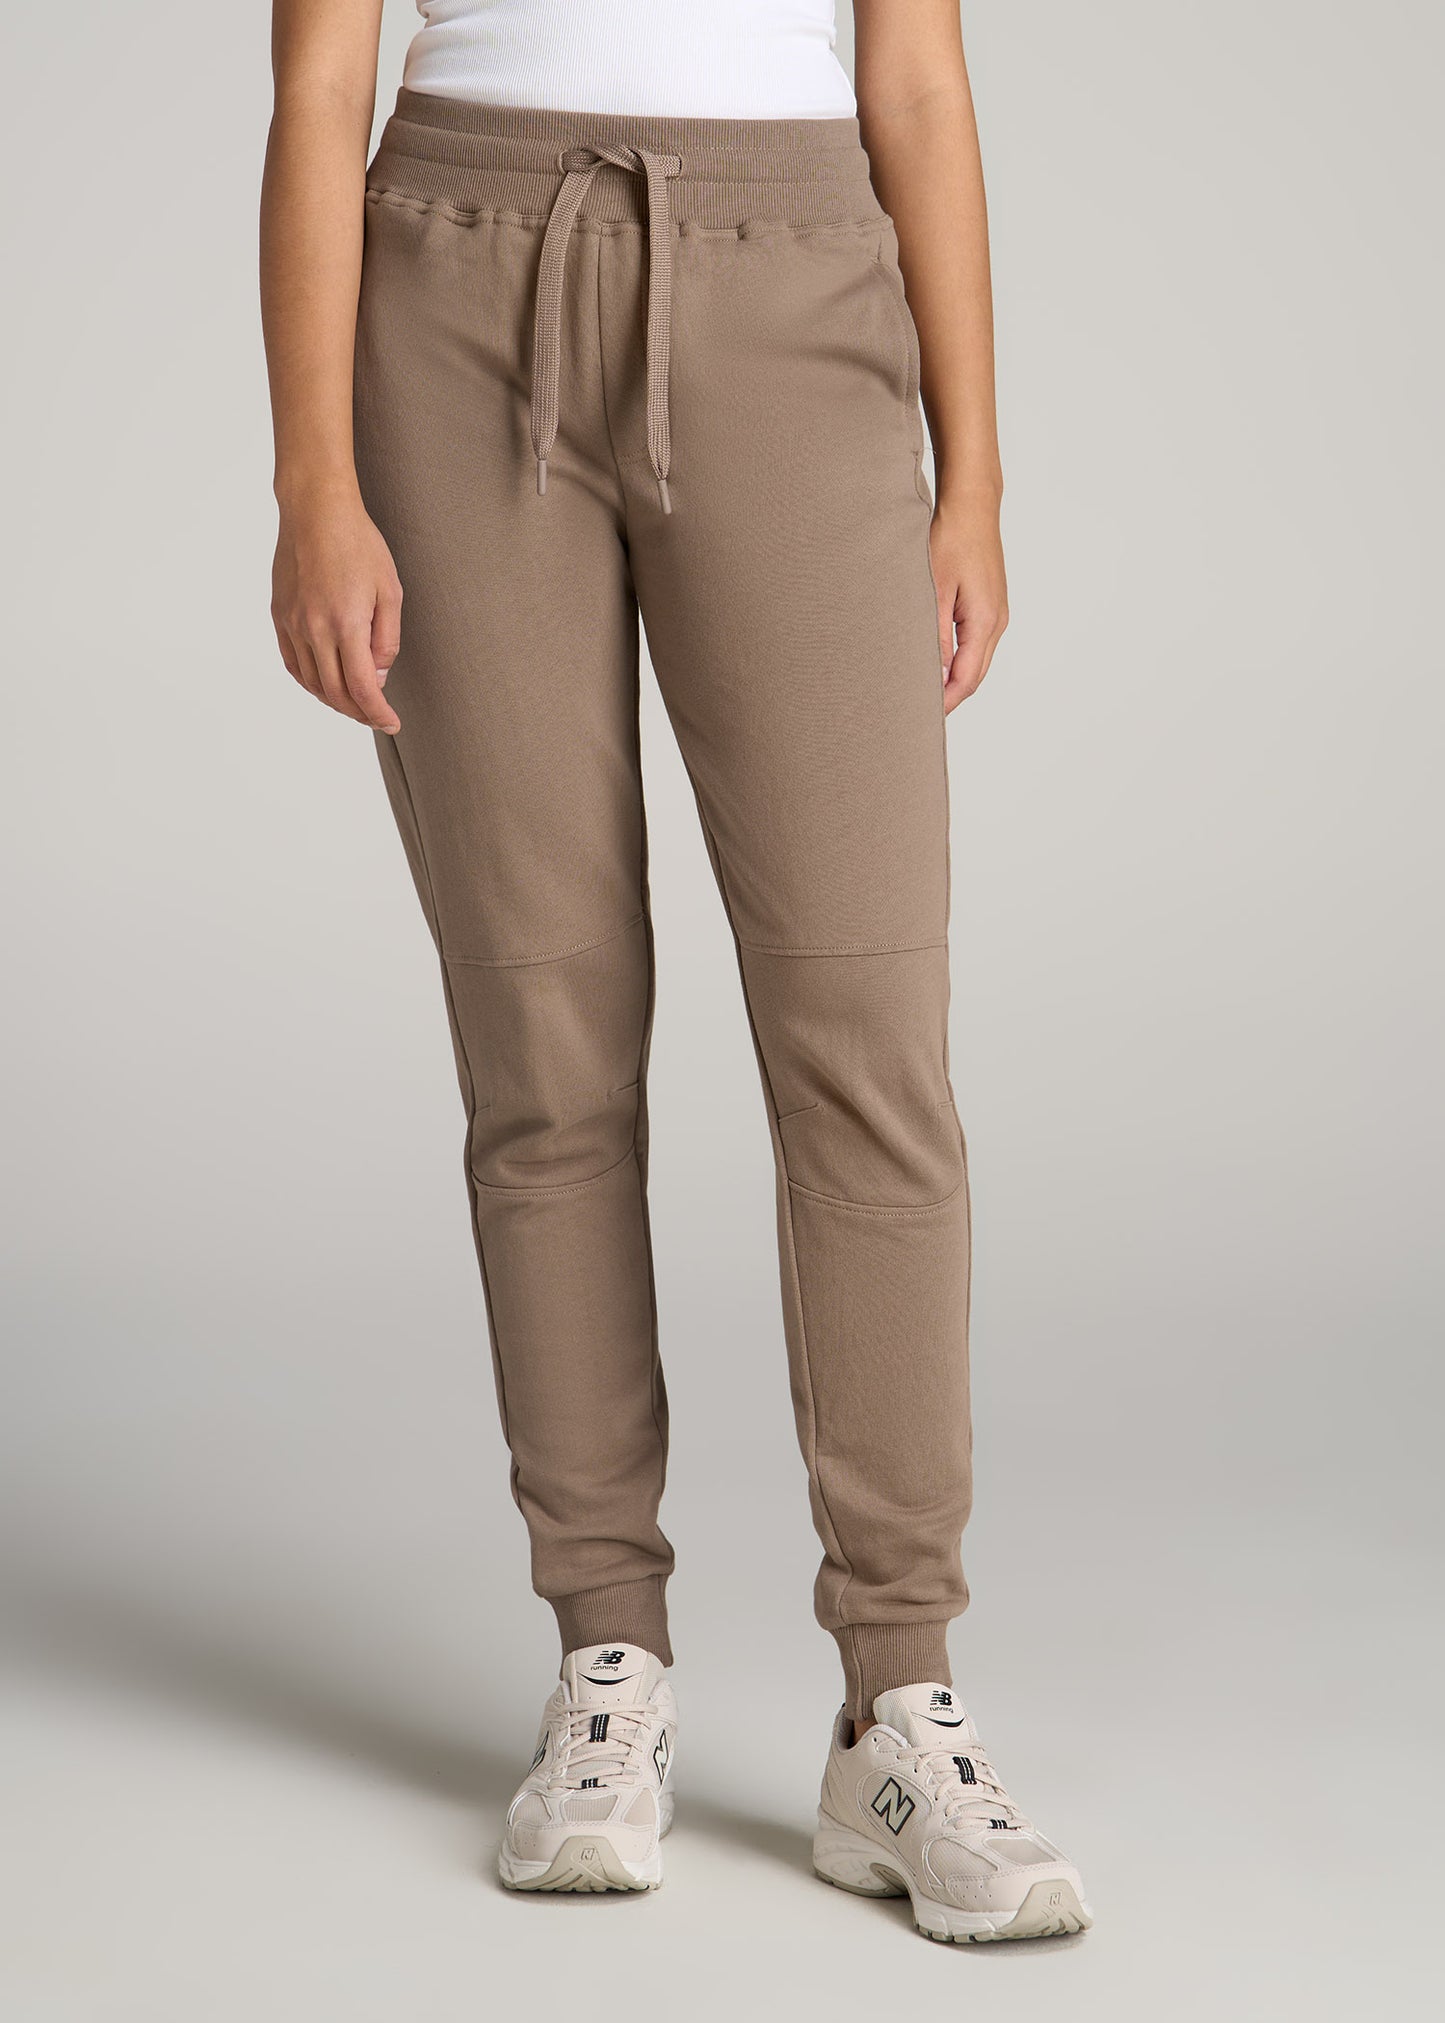 Wearever French Terry Tall Women's Joggers in Latte